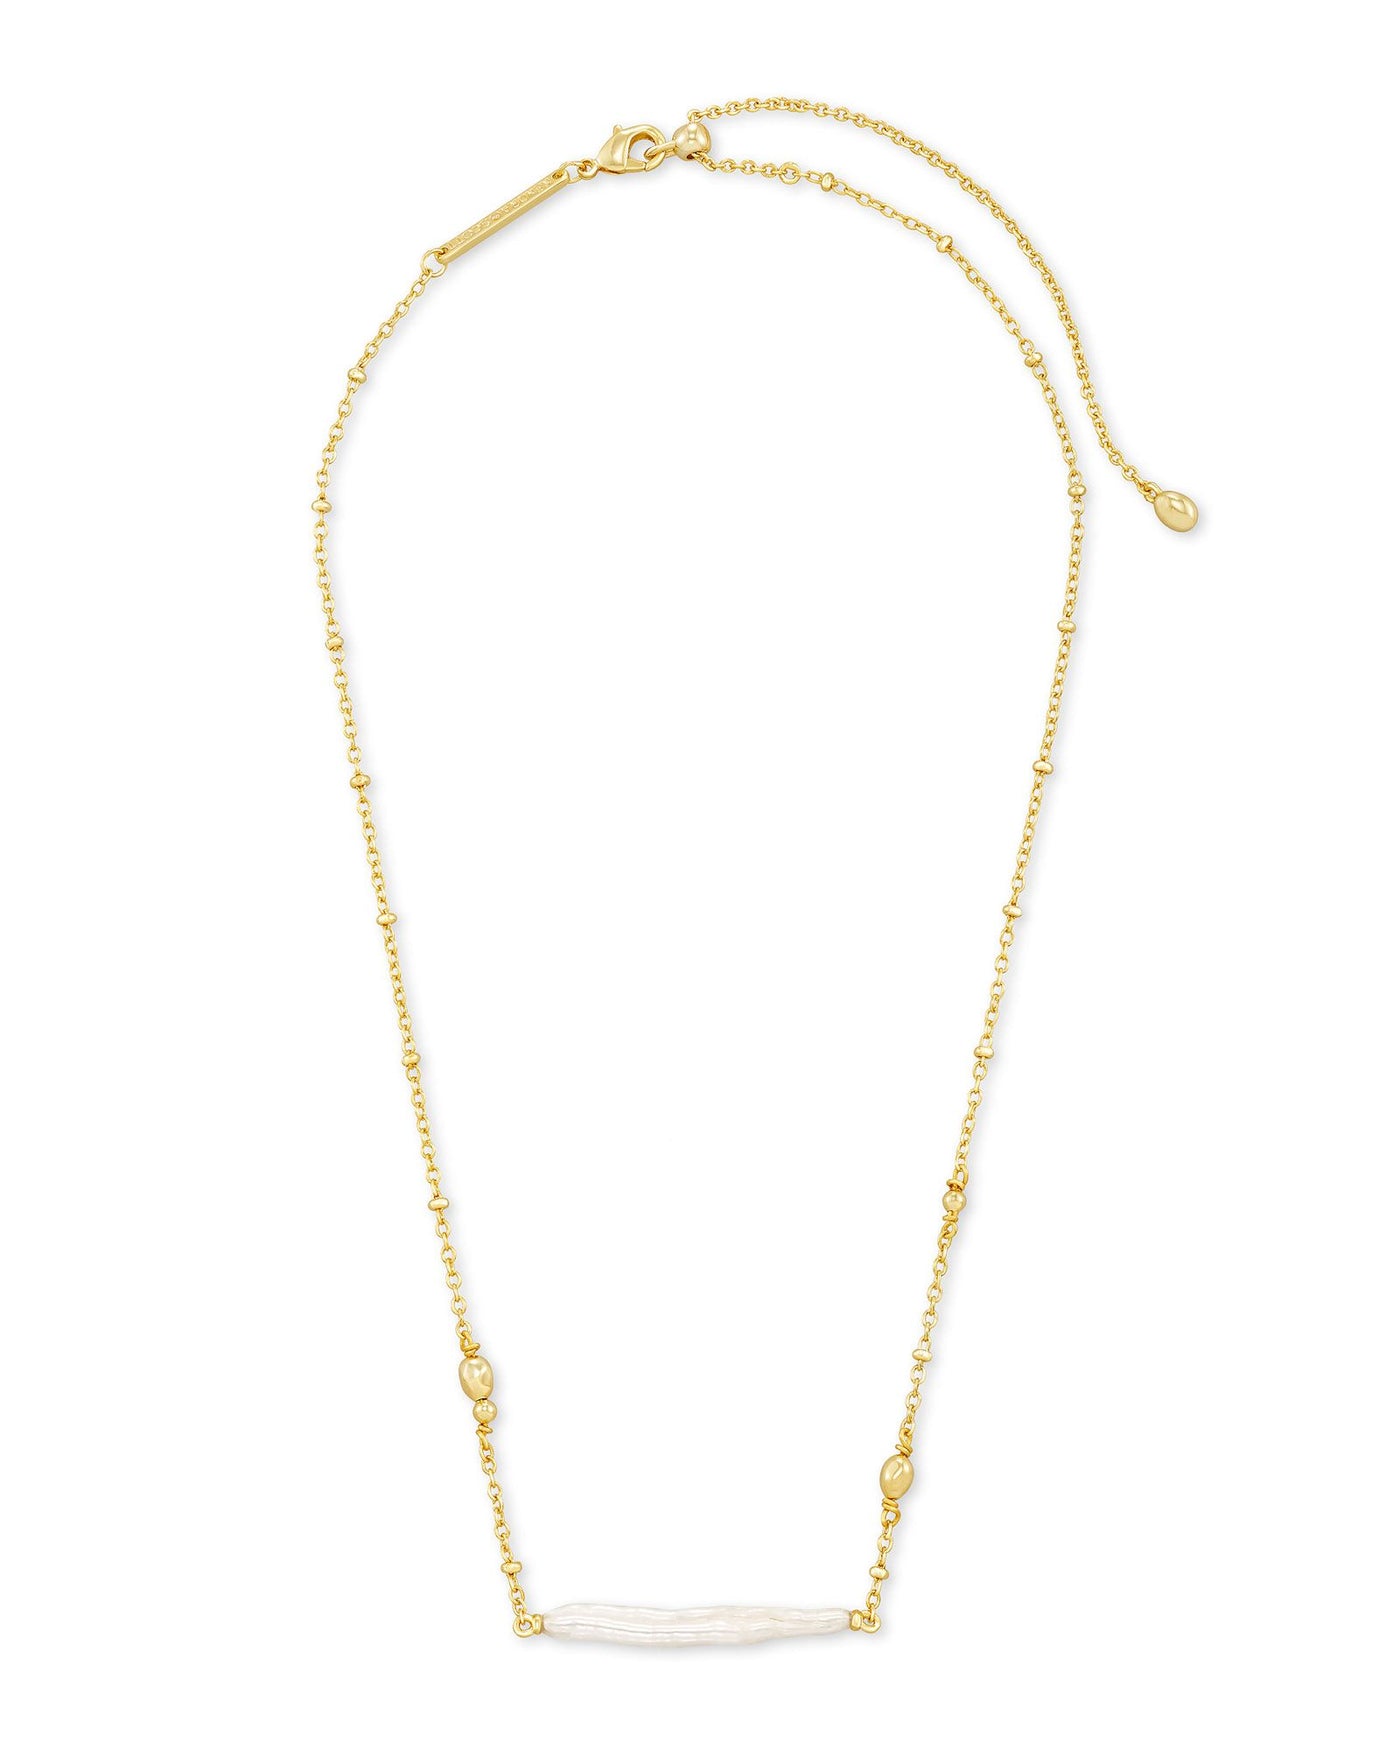 Kendra Scott Ellie Pendant Necklace in Gold on white background full view.